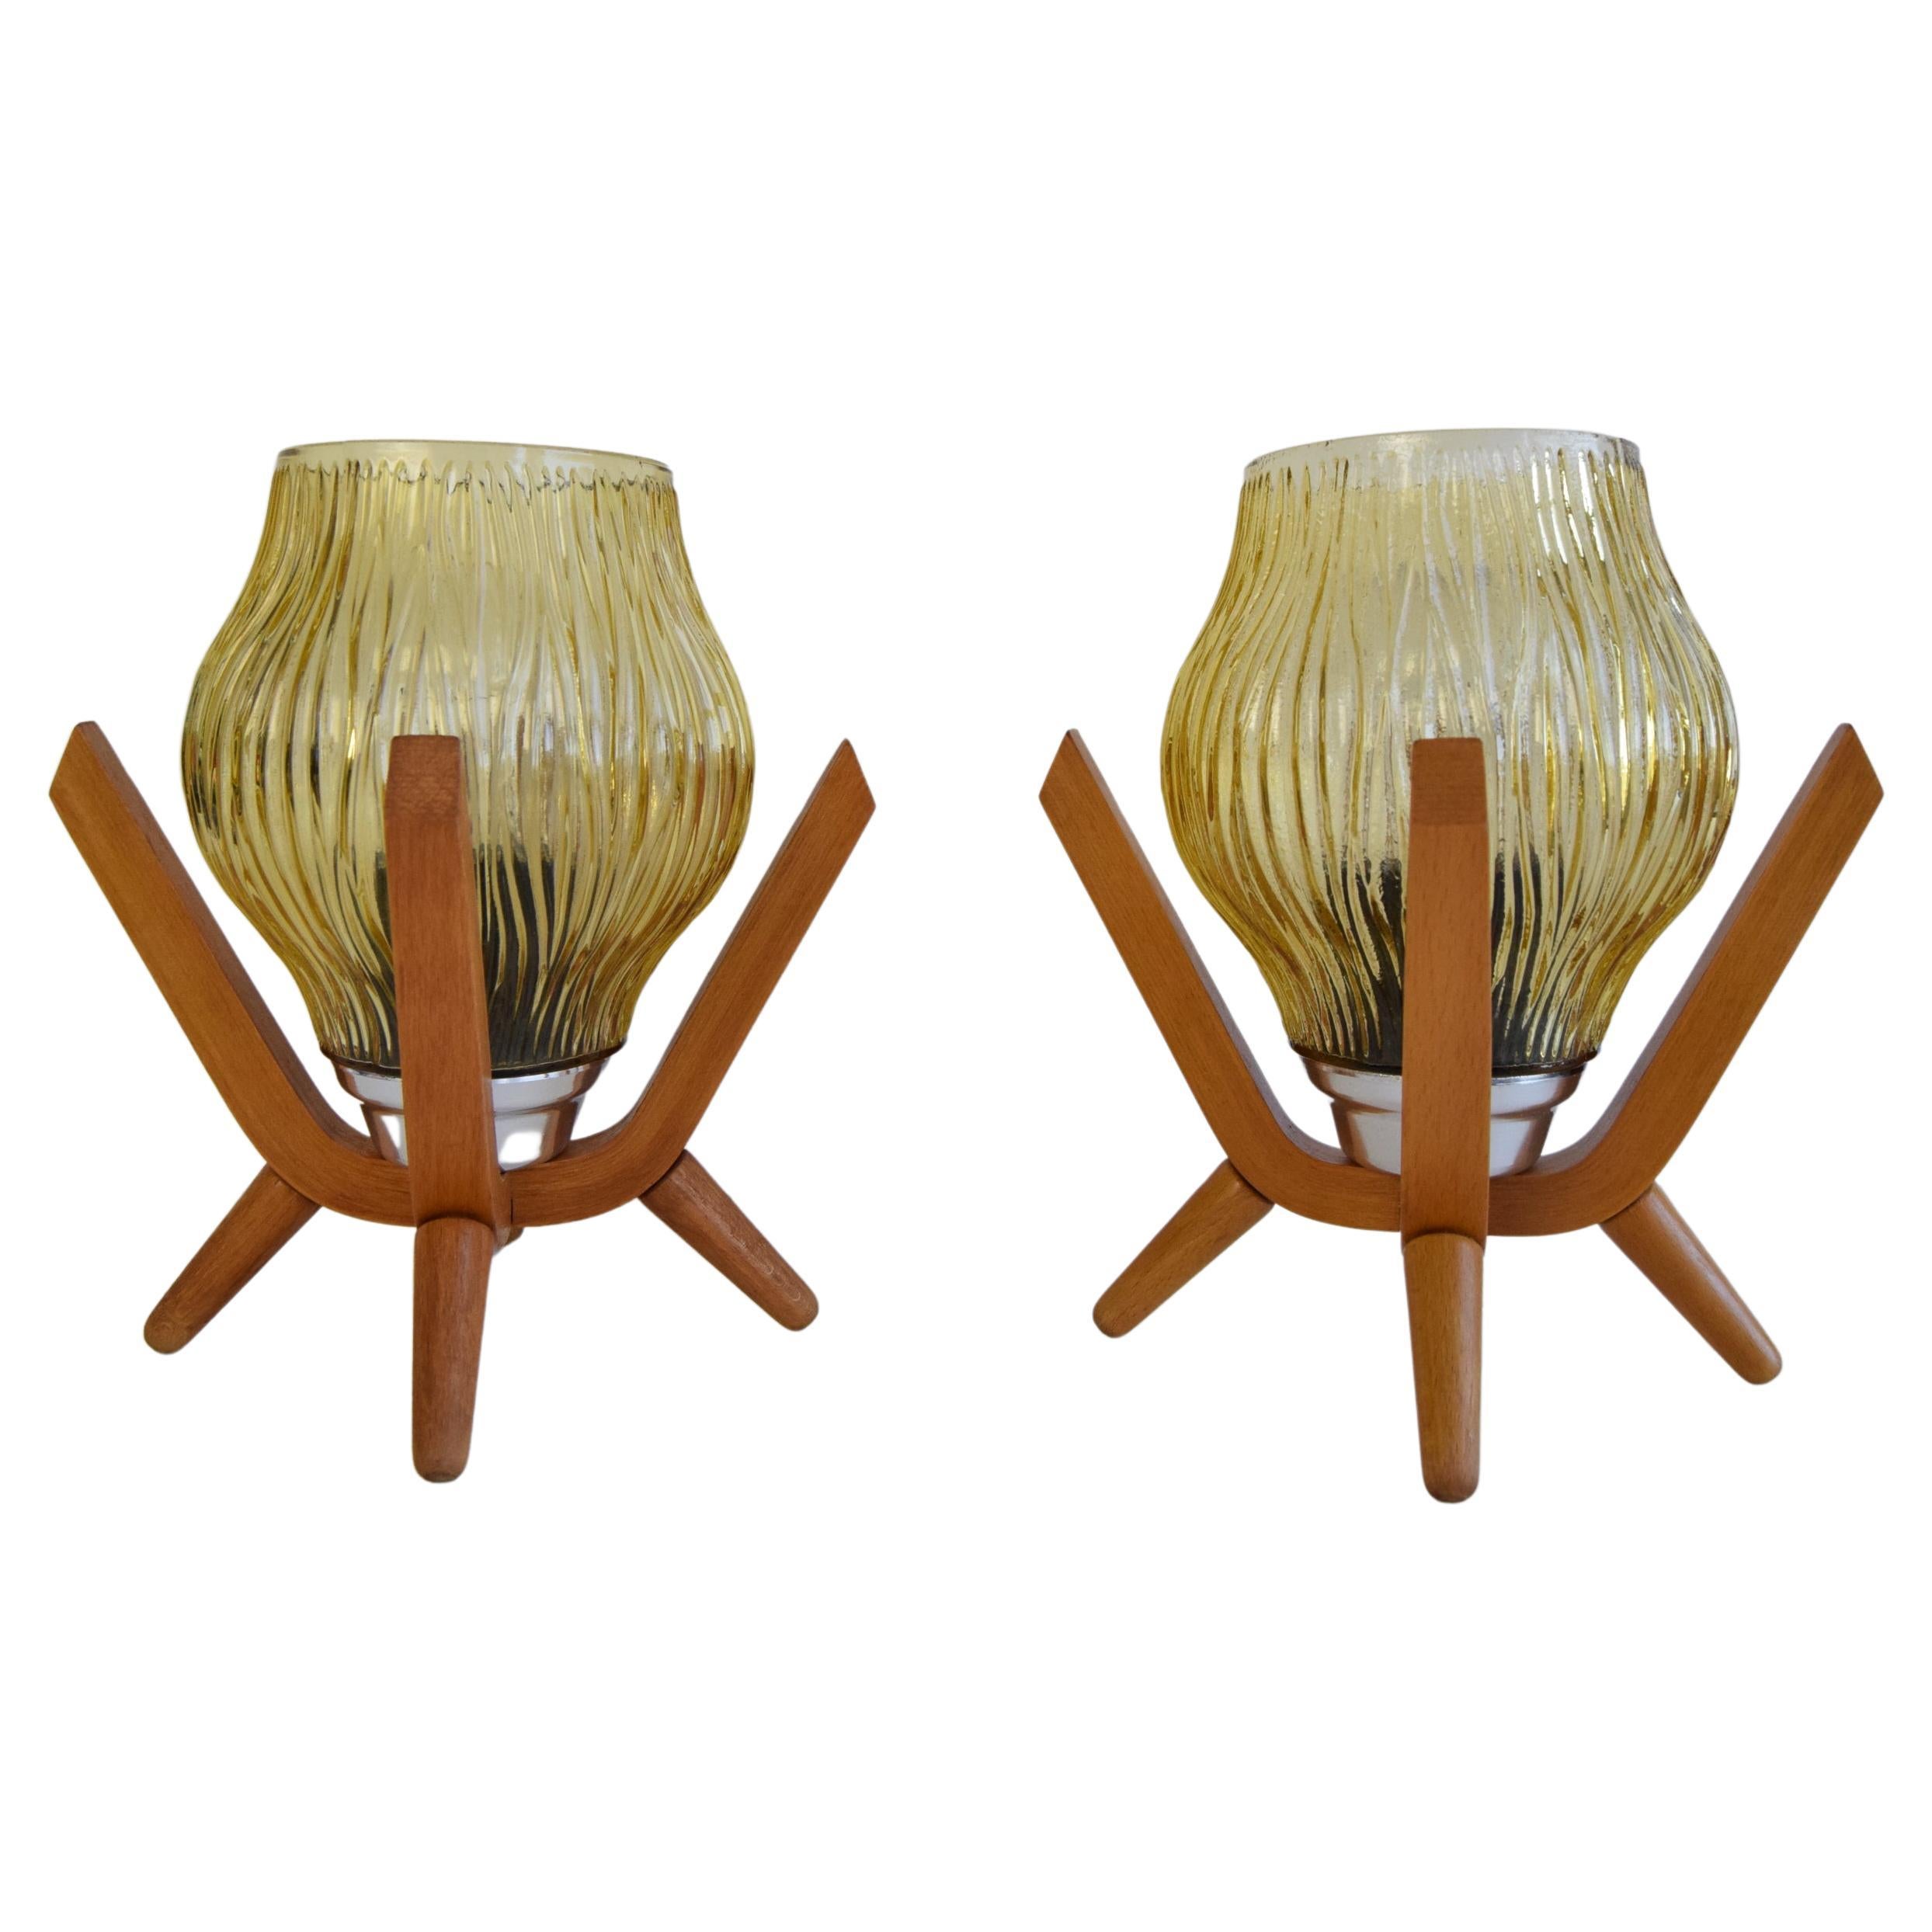 Pair of mid-century Wooden Design Table Lamps, by Dřevo Humpolec, 1970's. 